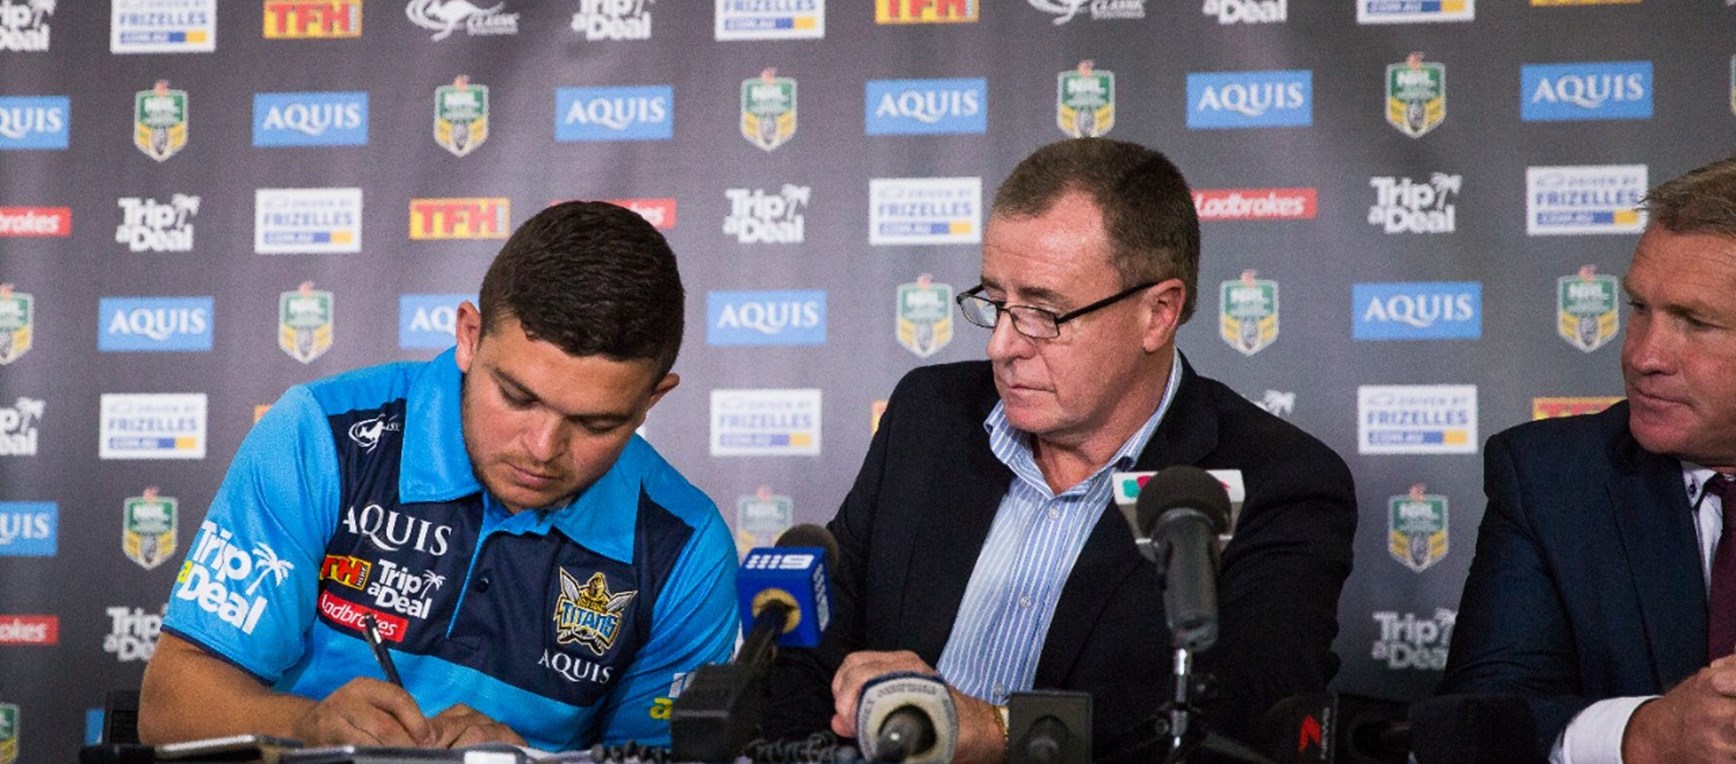 PHOTO GALLERY: Ash Taylor Press Conference